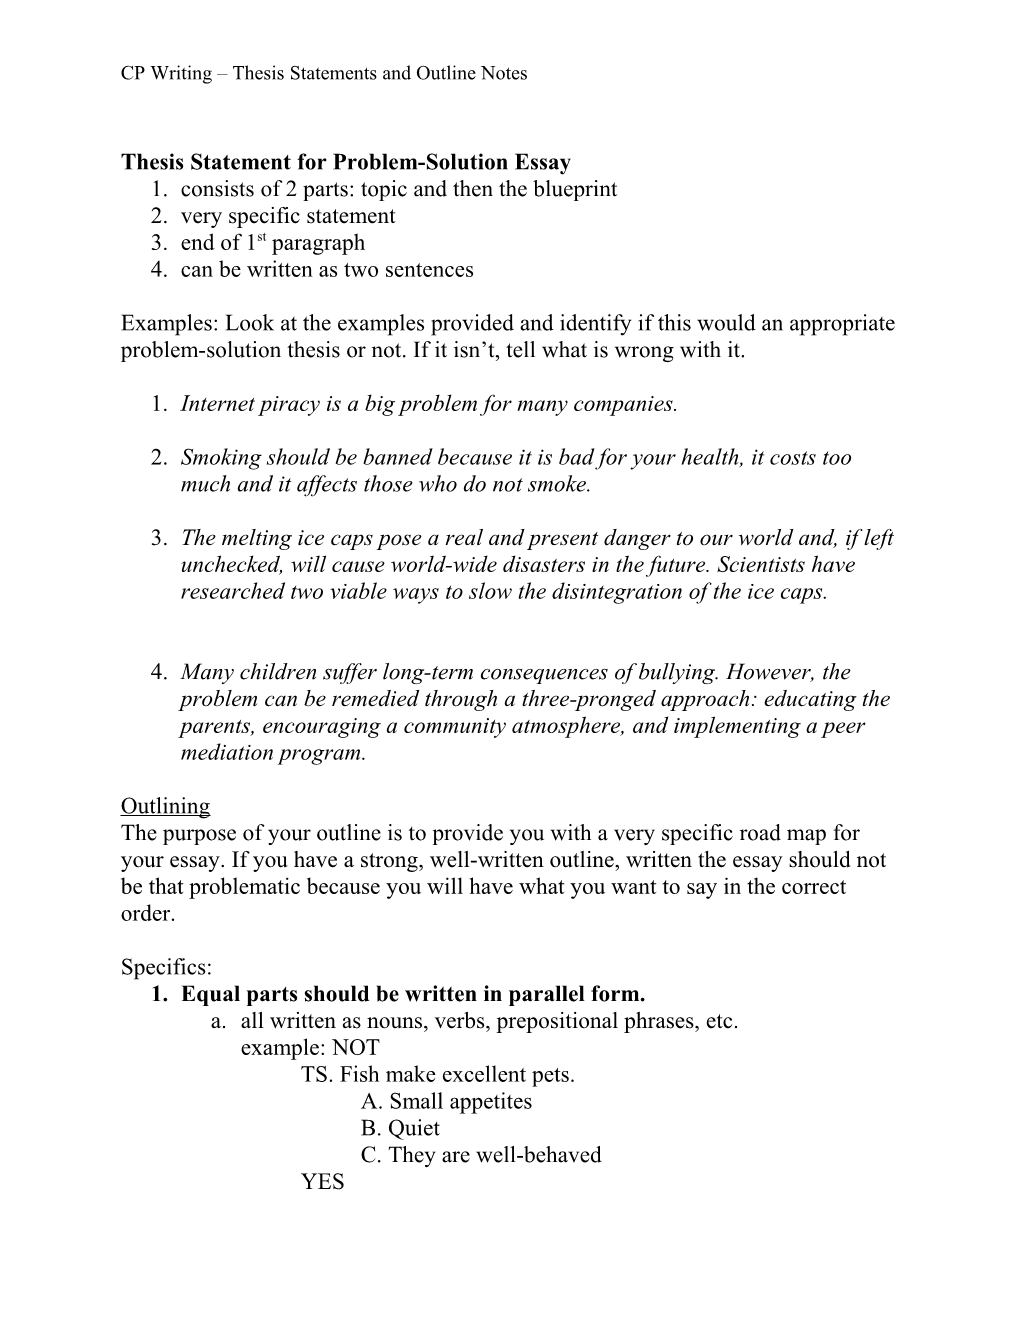 Thesis Statement for Problem-Solution Essay